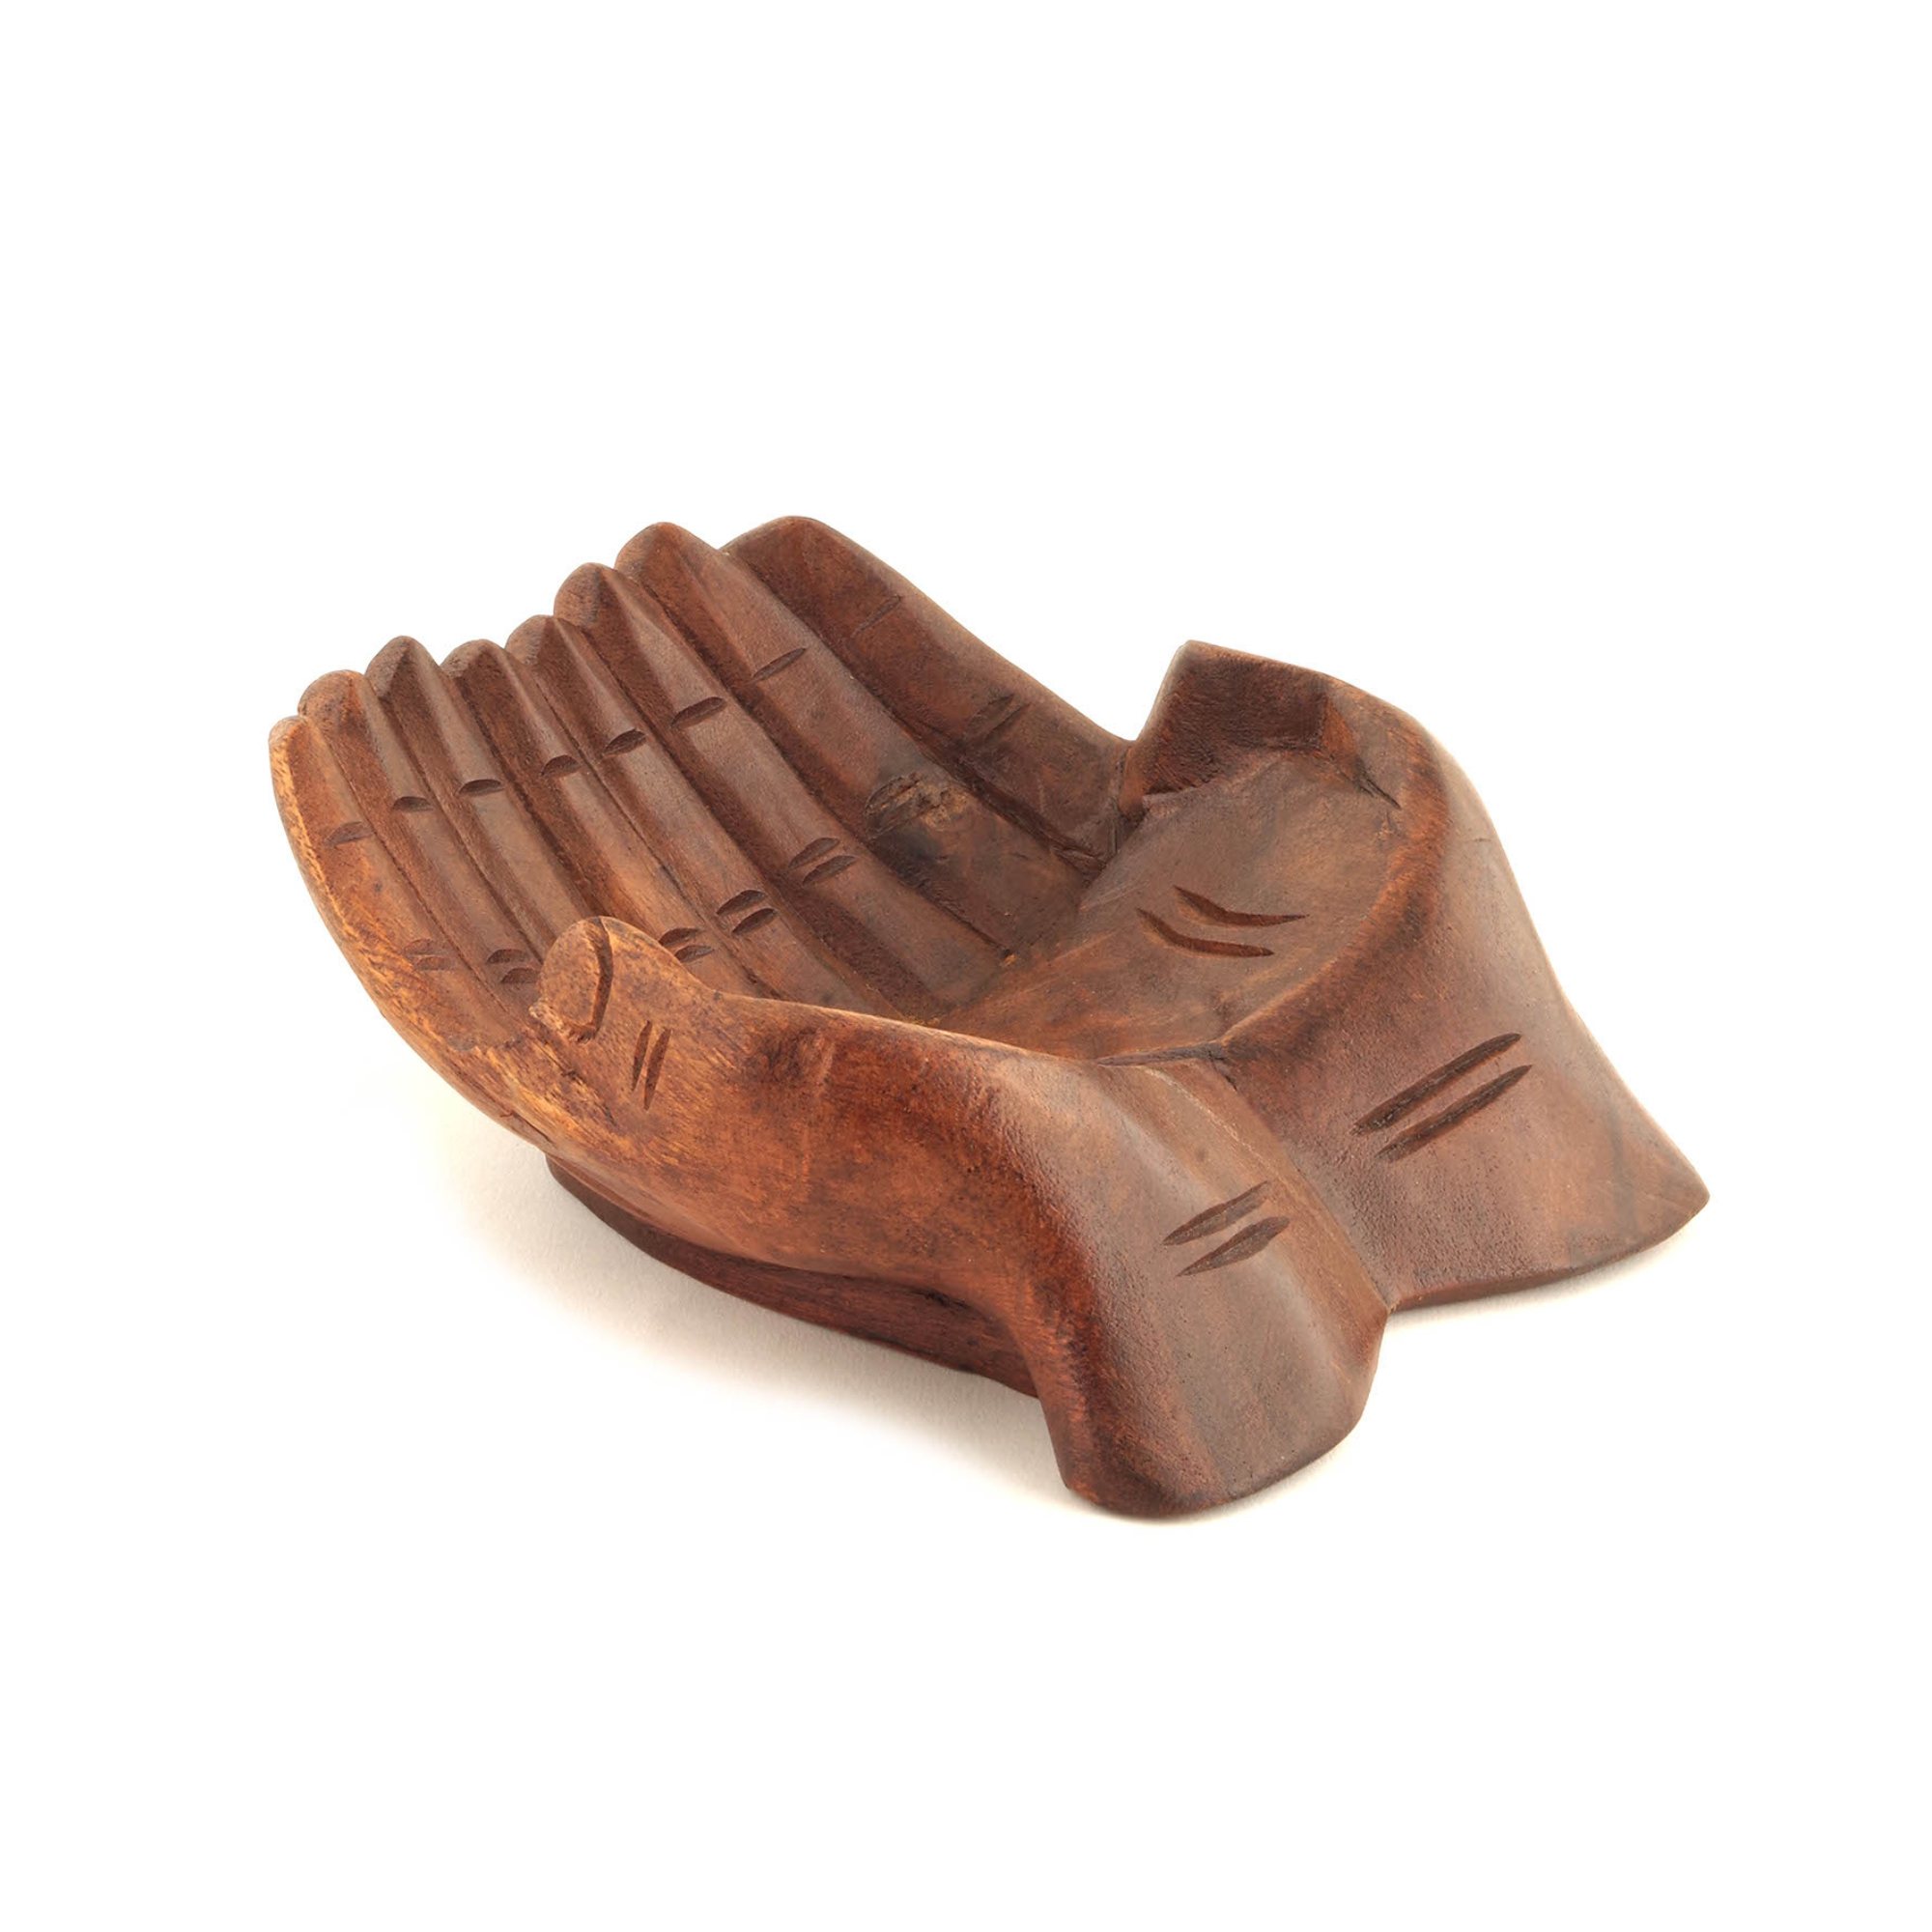 Buy The Handcarved Cupped Hands Ornament